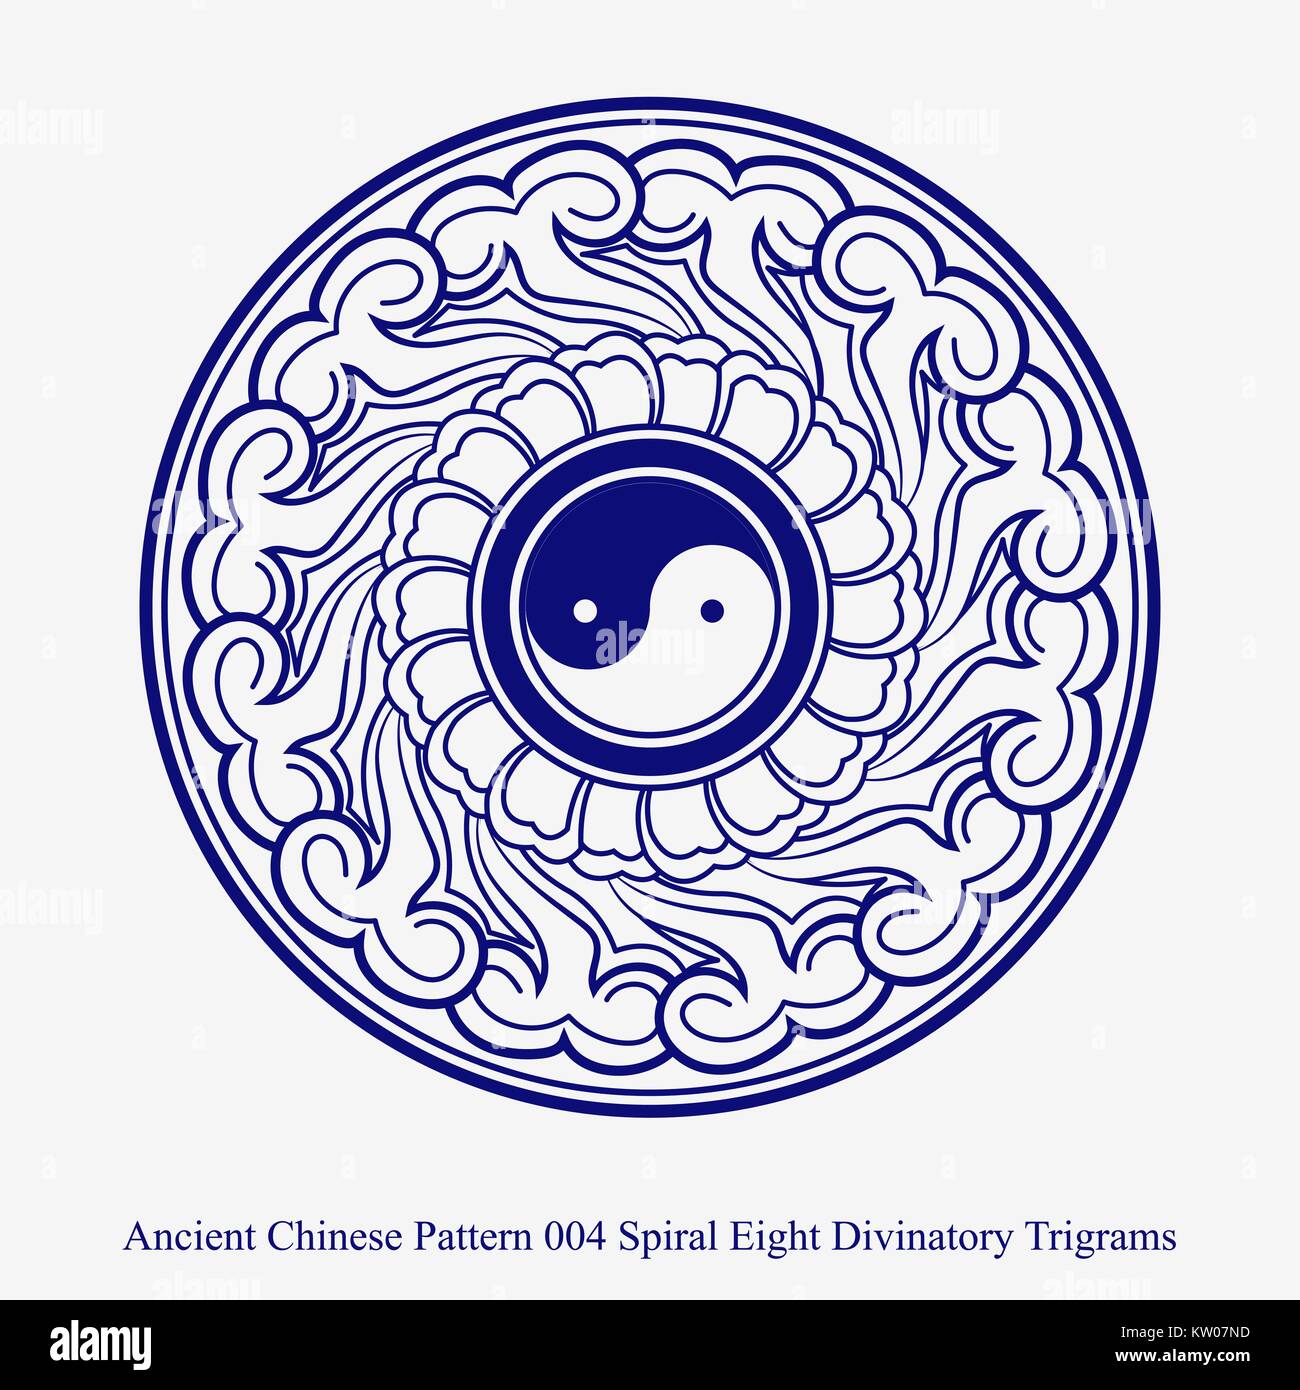 Ancient Chinese Pattern of Spiral Eight Divinatory Trigrams Stock Vector